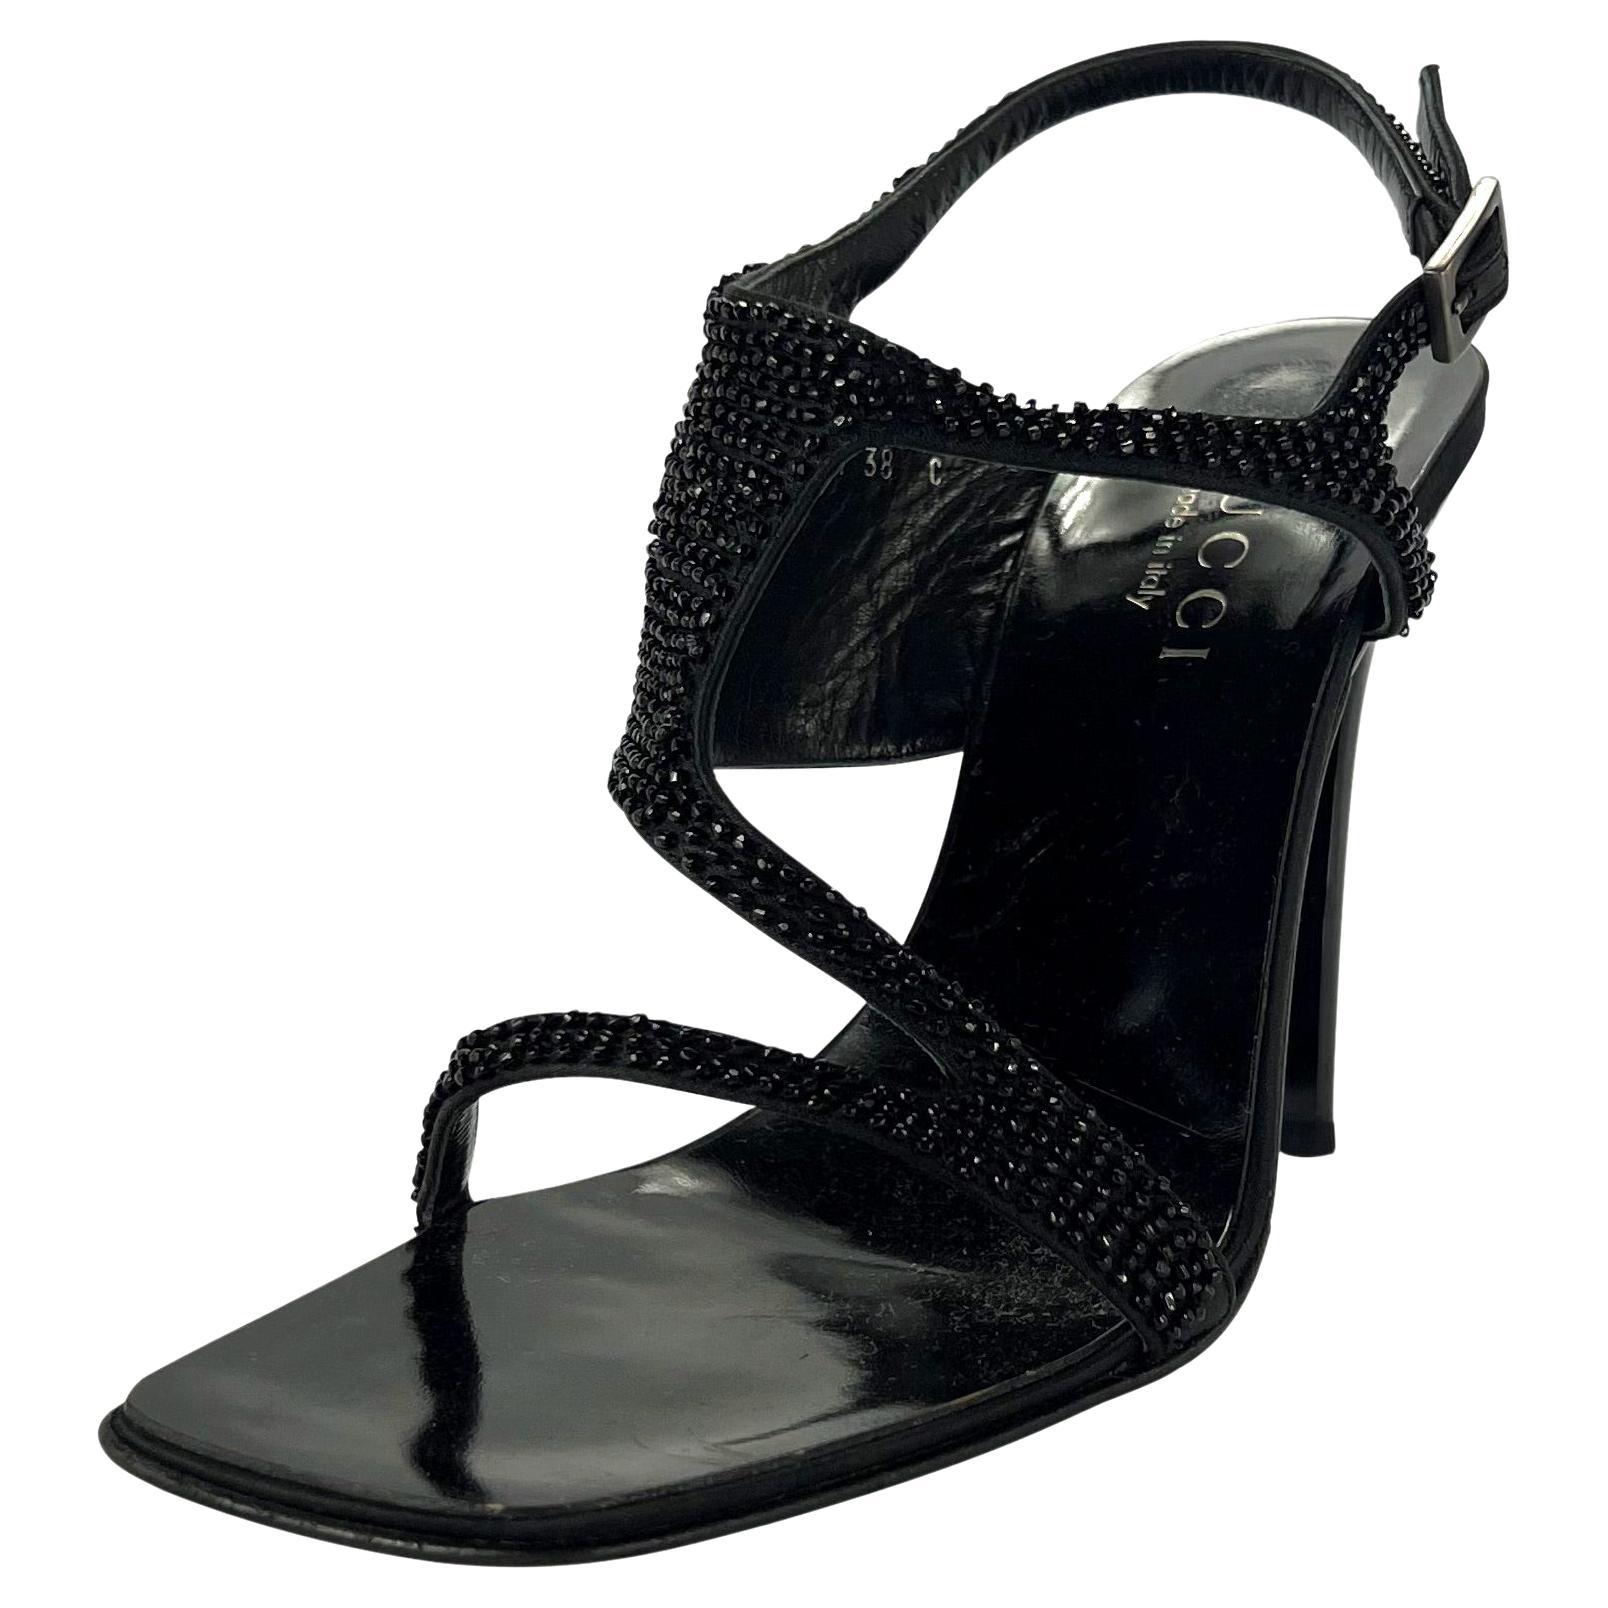 Presenting a pair of black beaded Gucci heels, designed by Tom Ford. From the early 2000s, this incredible pair of sleek black heels feature straps covered in black caviar beads with an adorning silver-tone buckle at the ankle. The perfect pair of